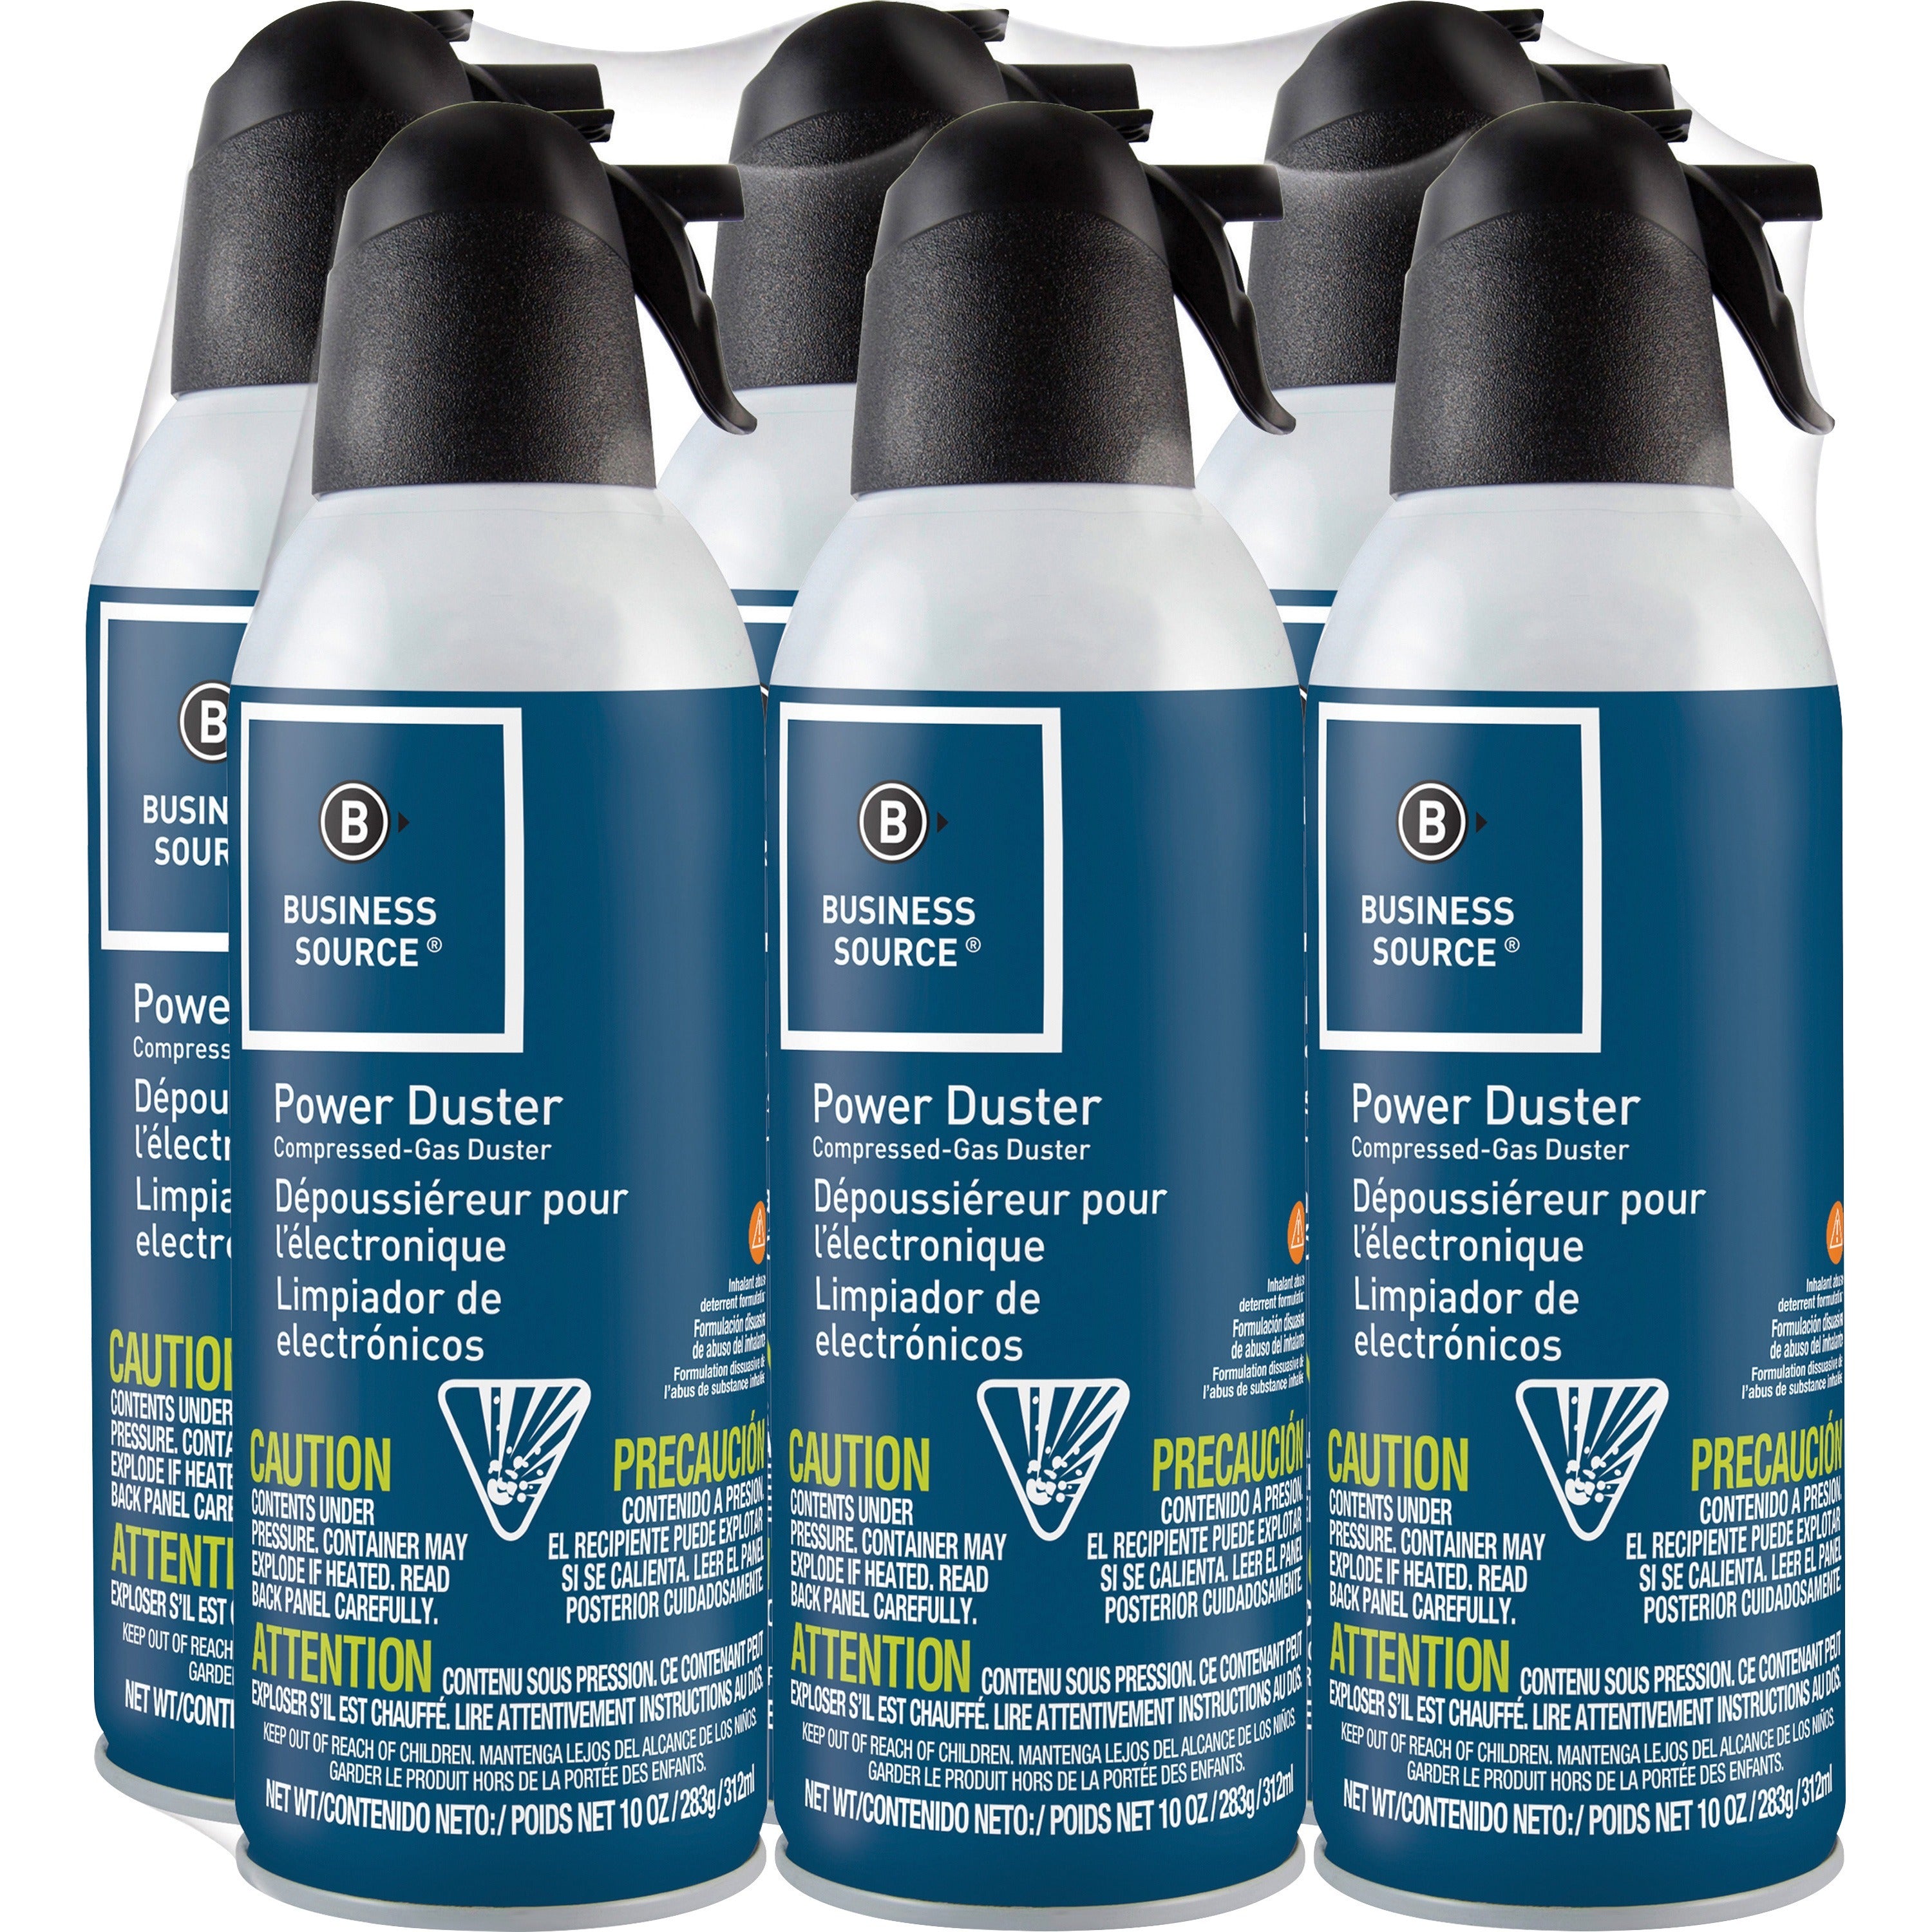 business-source-power-duster-10-oz-moisture-free-ozone-safe-6-pack-multi_bsn24306 - 1